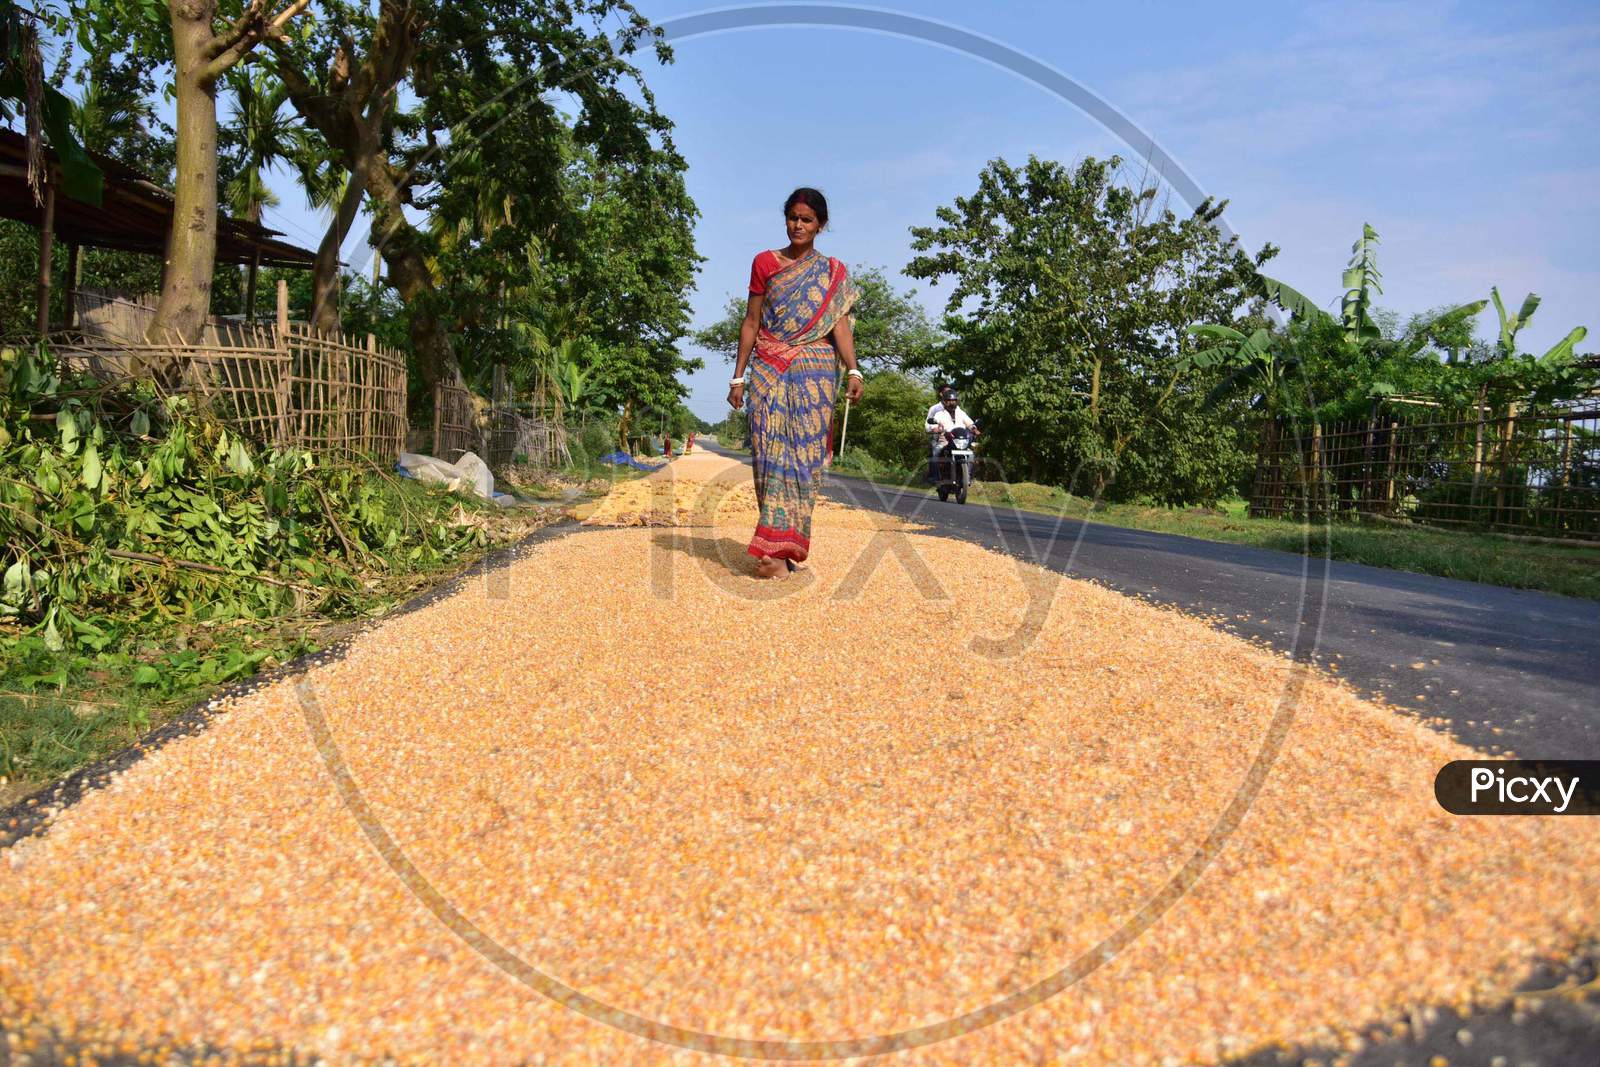 An Indian Woman  Spreads Maize Husks To Dry On A Road  In Morigaon District Of Assam ,India  On June 5,2020.